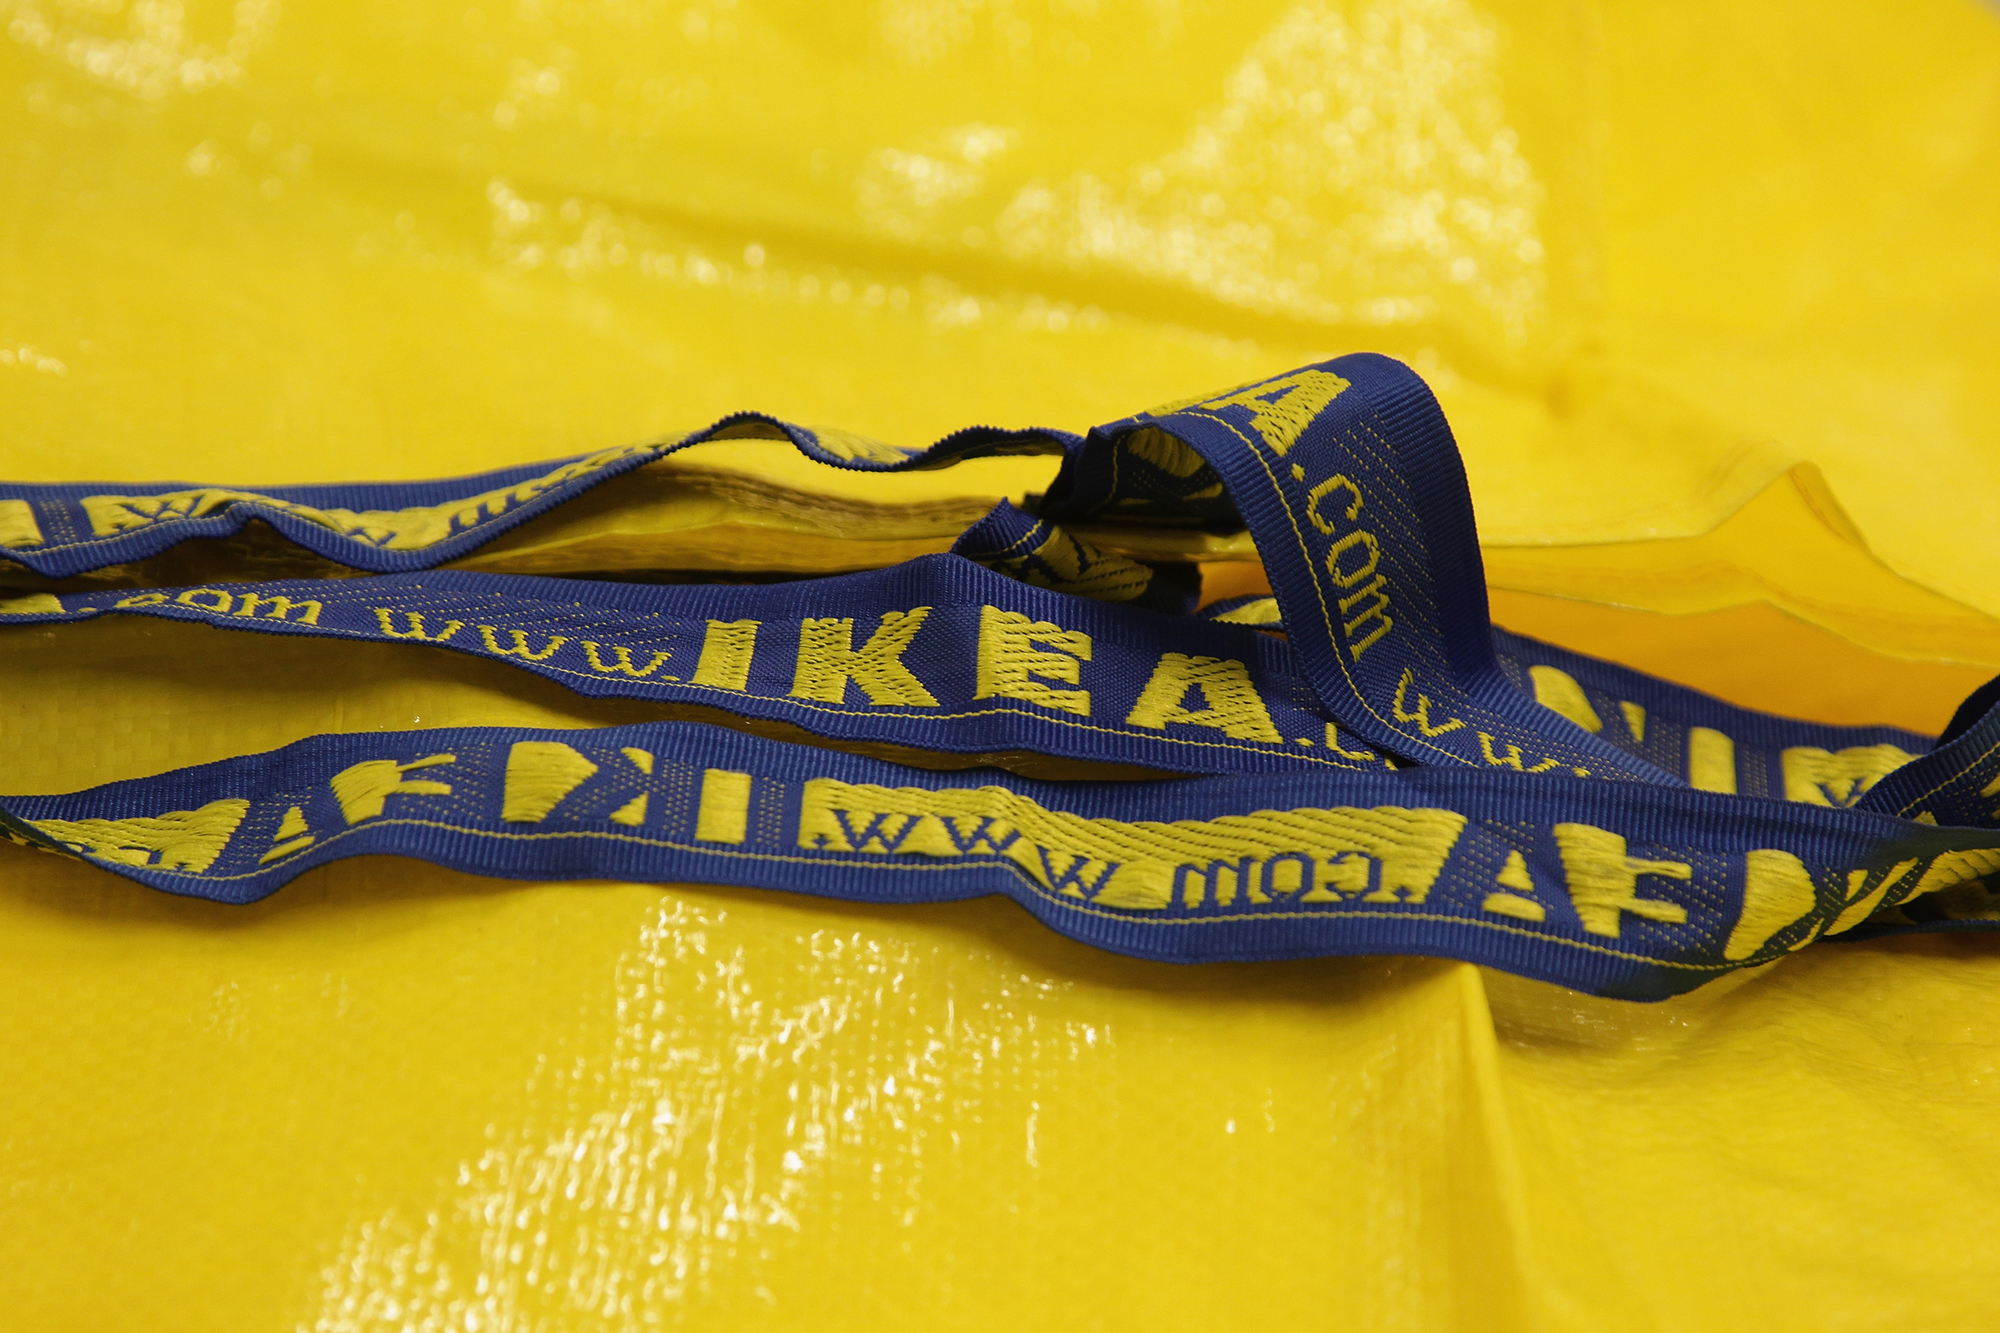 Off-White's Virgil Abloh Is Redesigning the Blue Ikea Bag – Footwear News